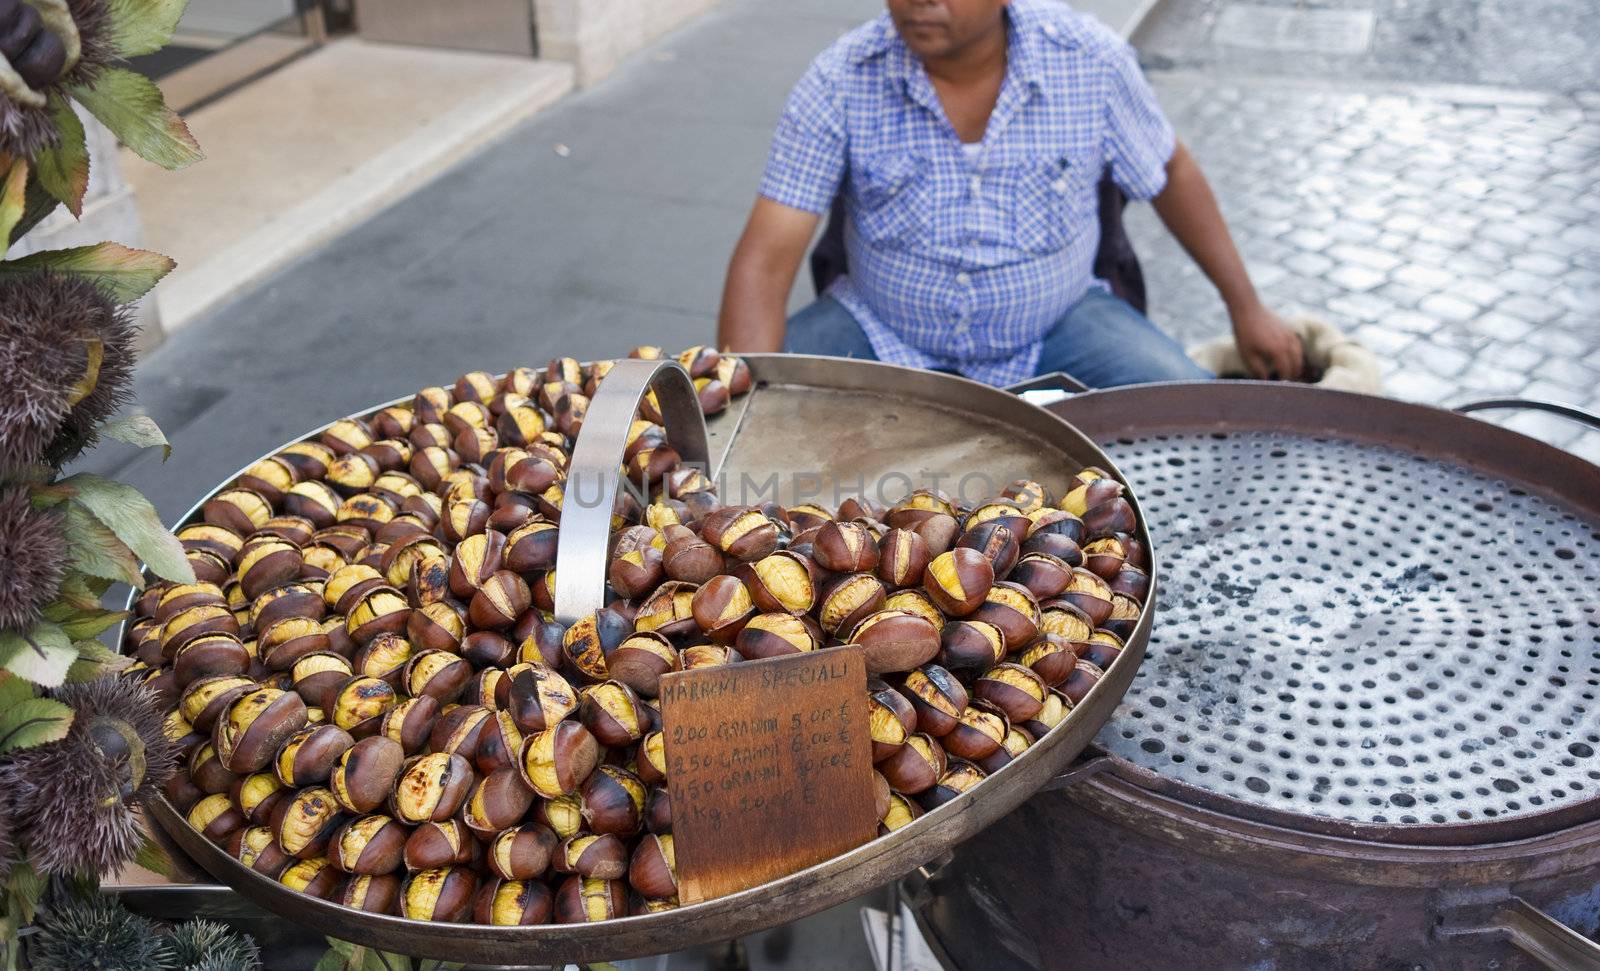 Roasted chestnuts for sale by ABCDK